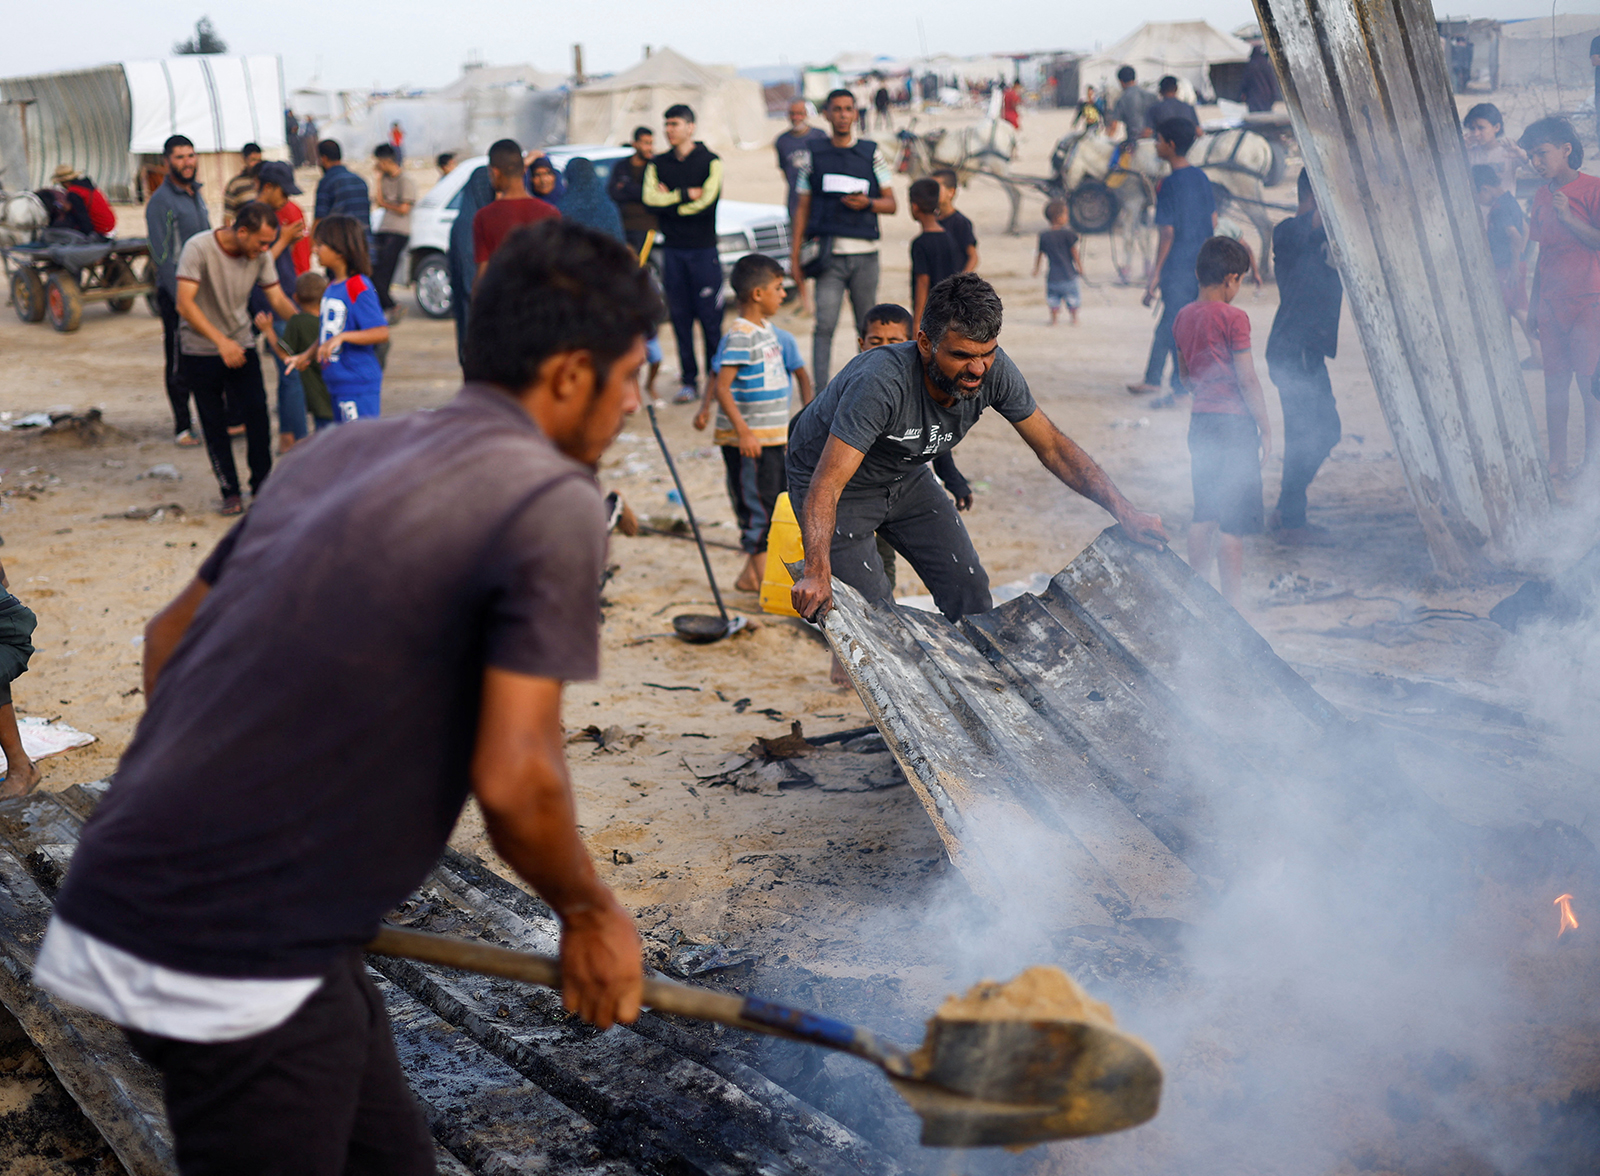 Palestinians put out a fire at the site of an Israeli strike on an area designated for displaced people, in Rafah, Gaza, on May 27.